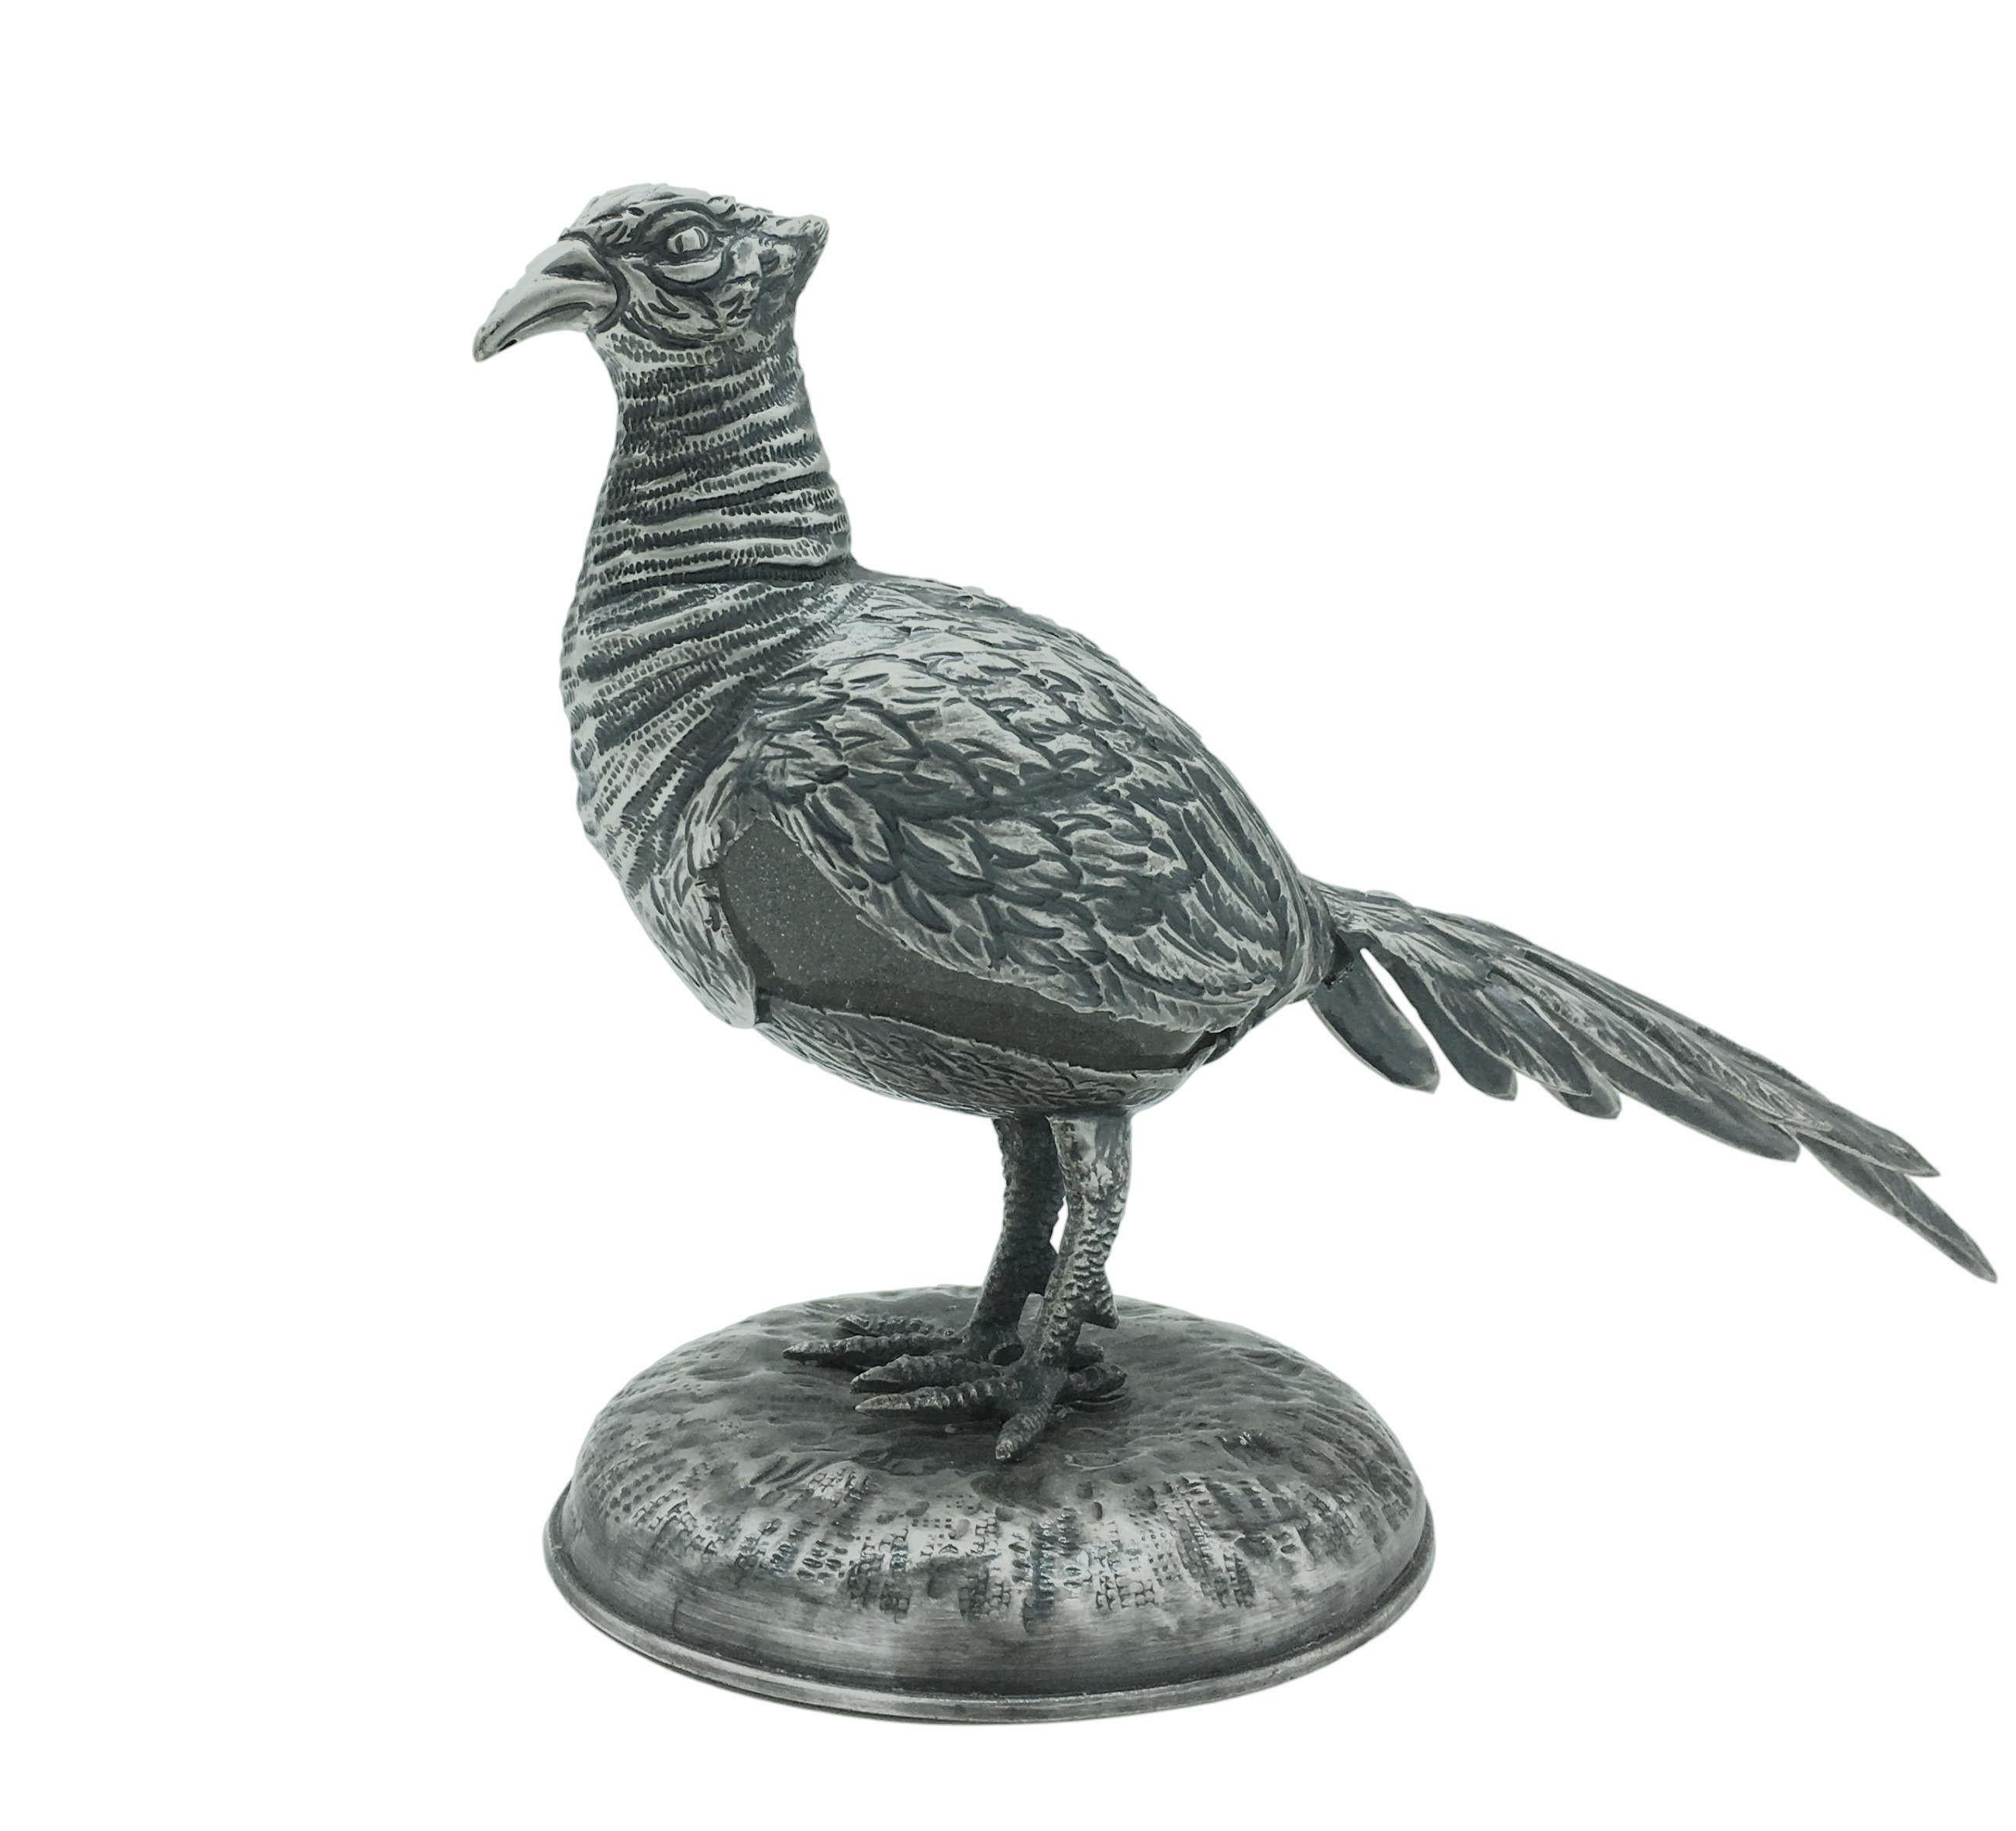 Rare pheasant sculpture signed Gabriella Crespi with a murano glass egg, made in Italy, in the 1970s.